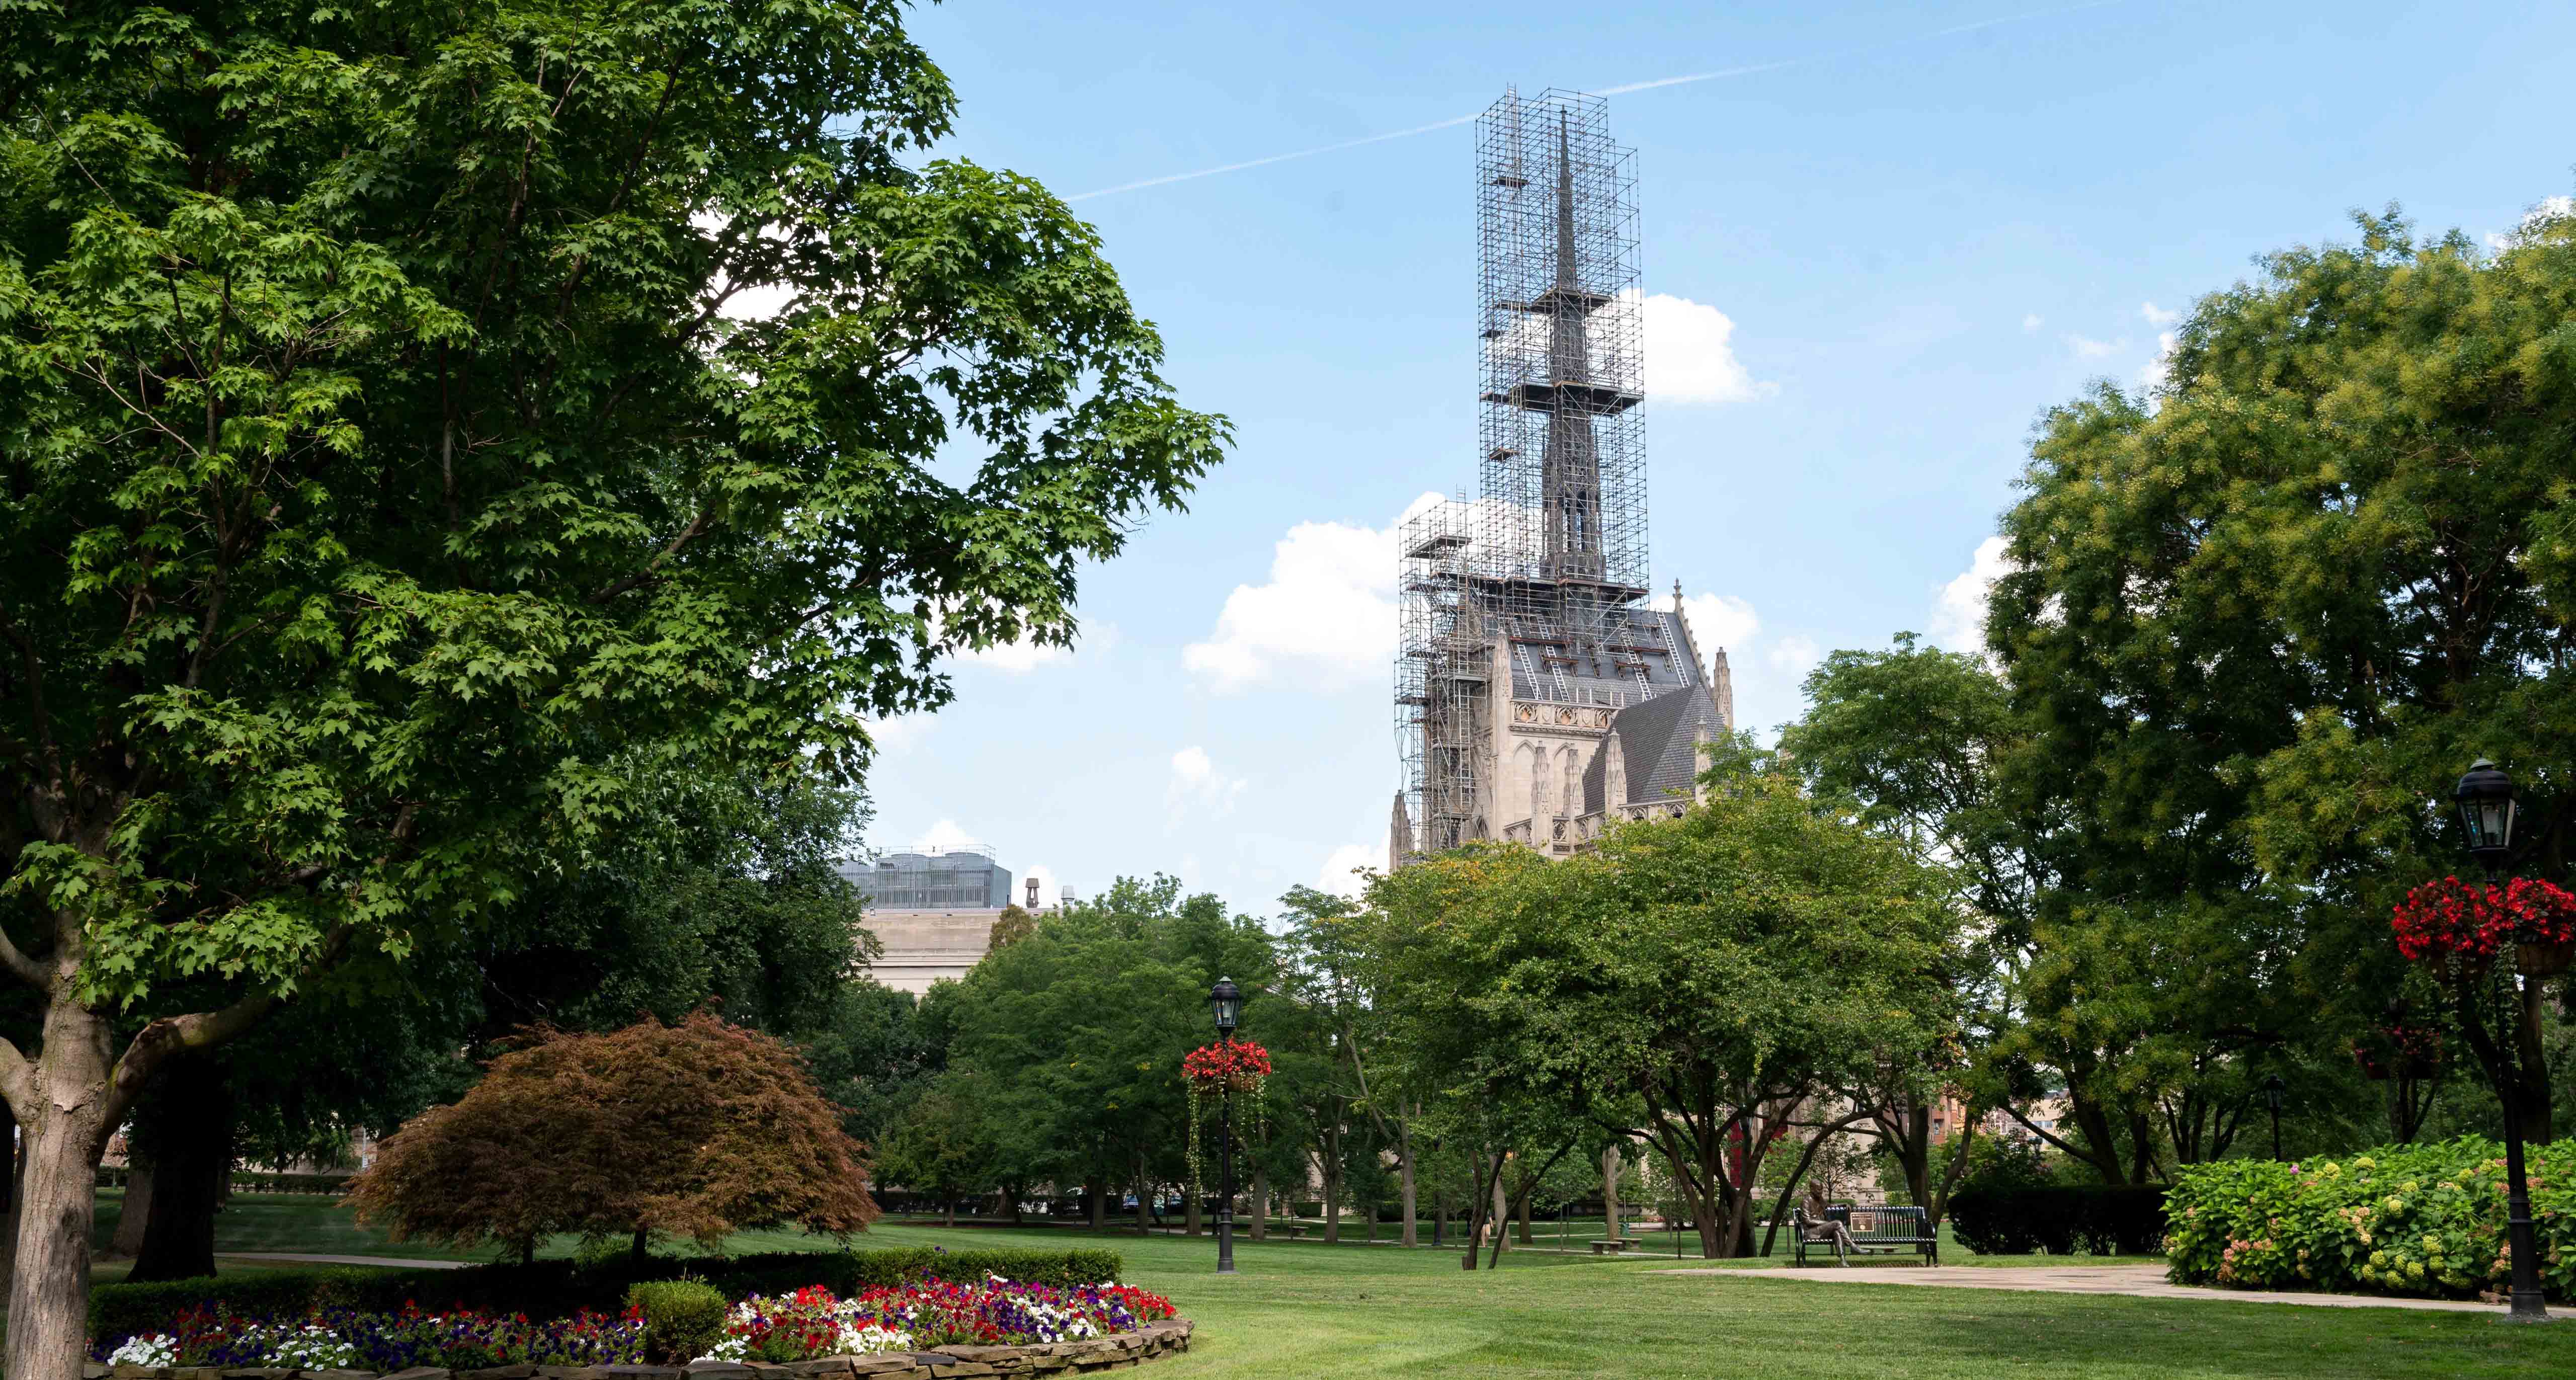 Heinz Chapel spire surrounded by scaffolding